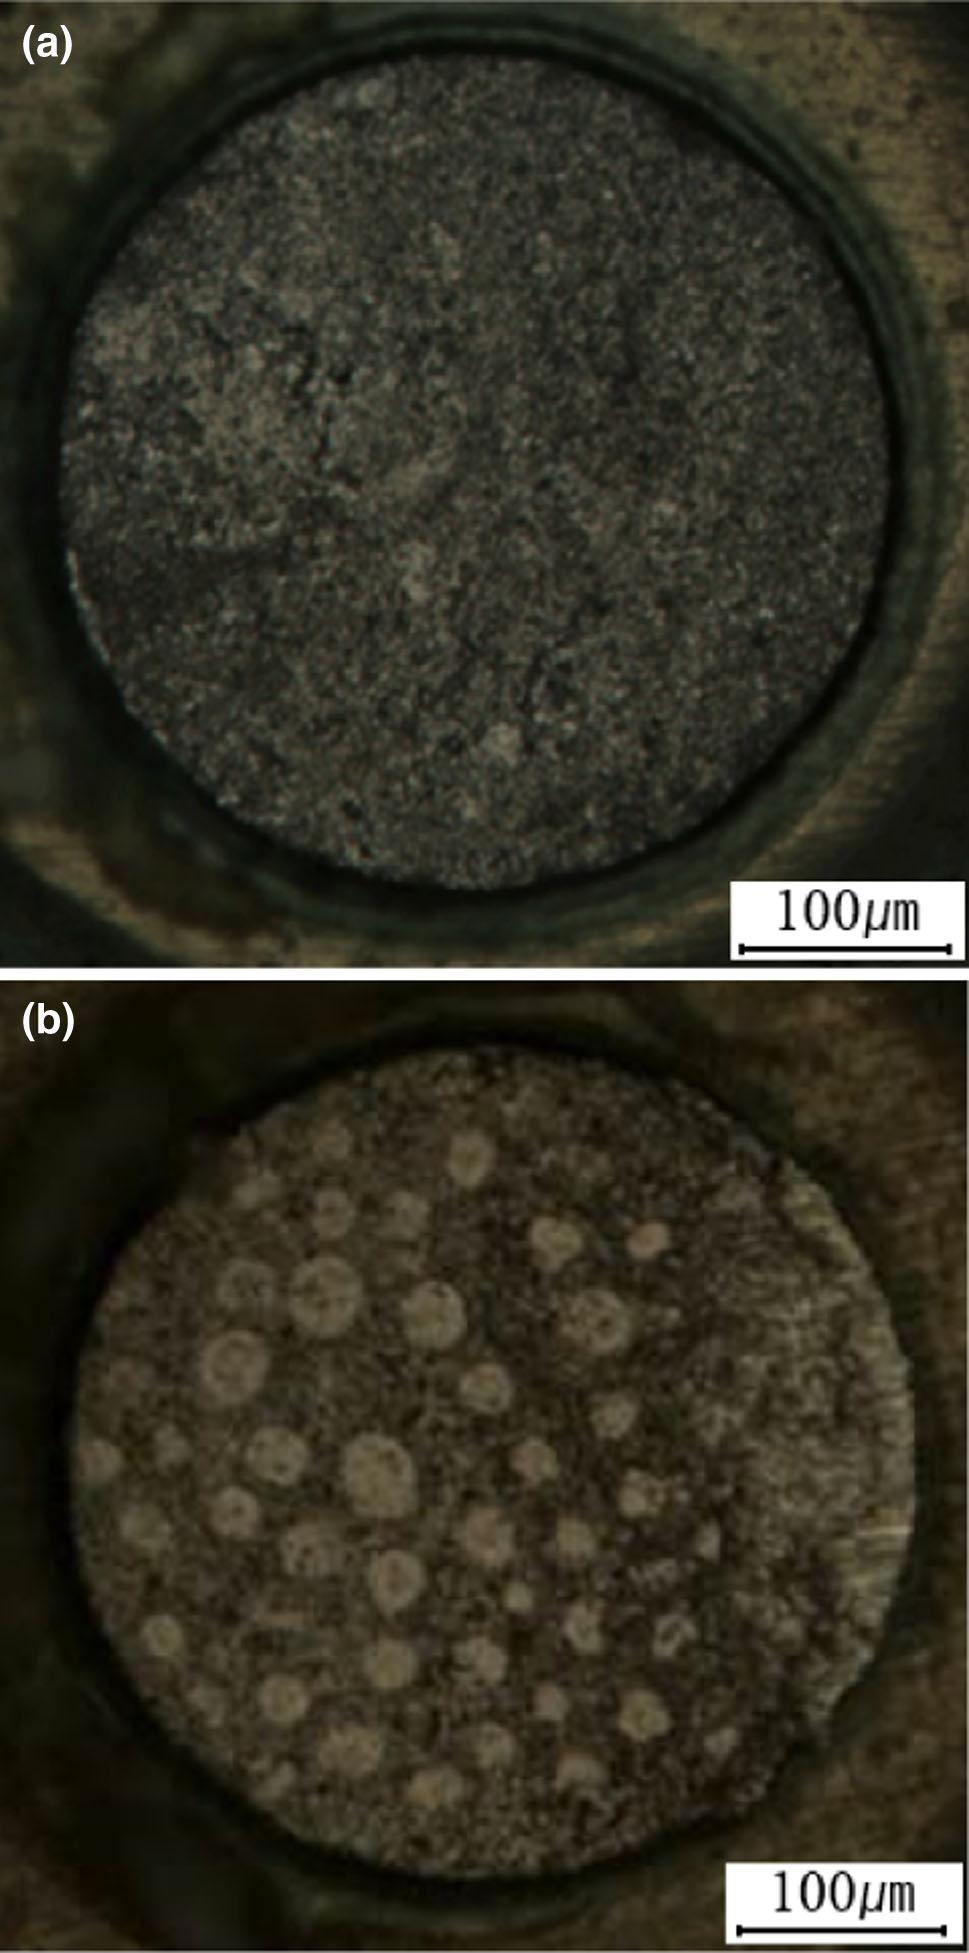 4460 Seo, K.-H. Kim, Bang, M.-S. Kim, and Yoo Fig. 6. Optical micrographs of the fracture surface after the HSS test for the (a) 0 MTO and (b) 3 MTO samples.